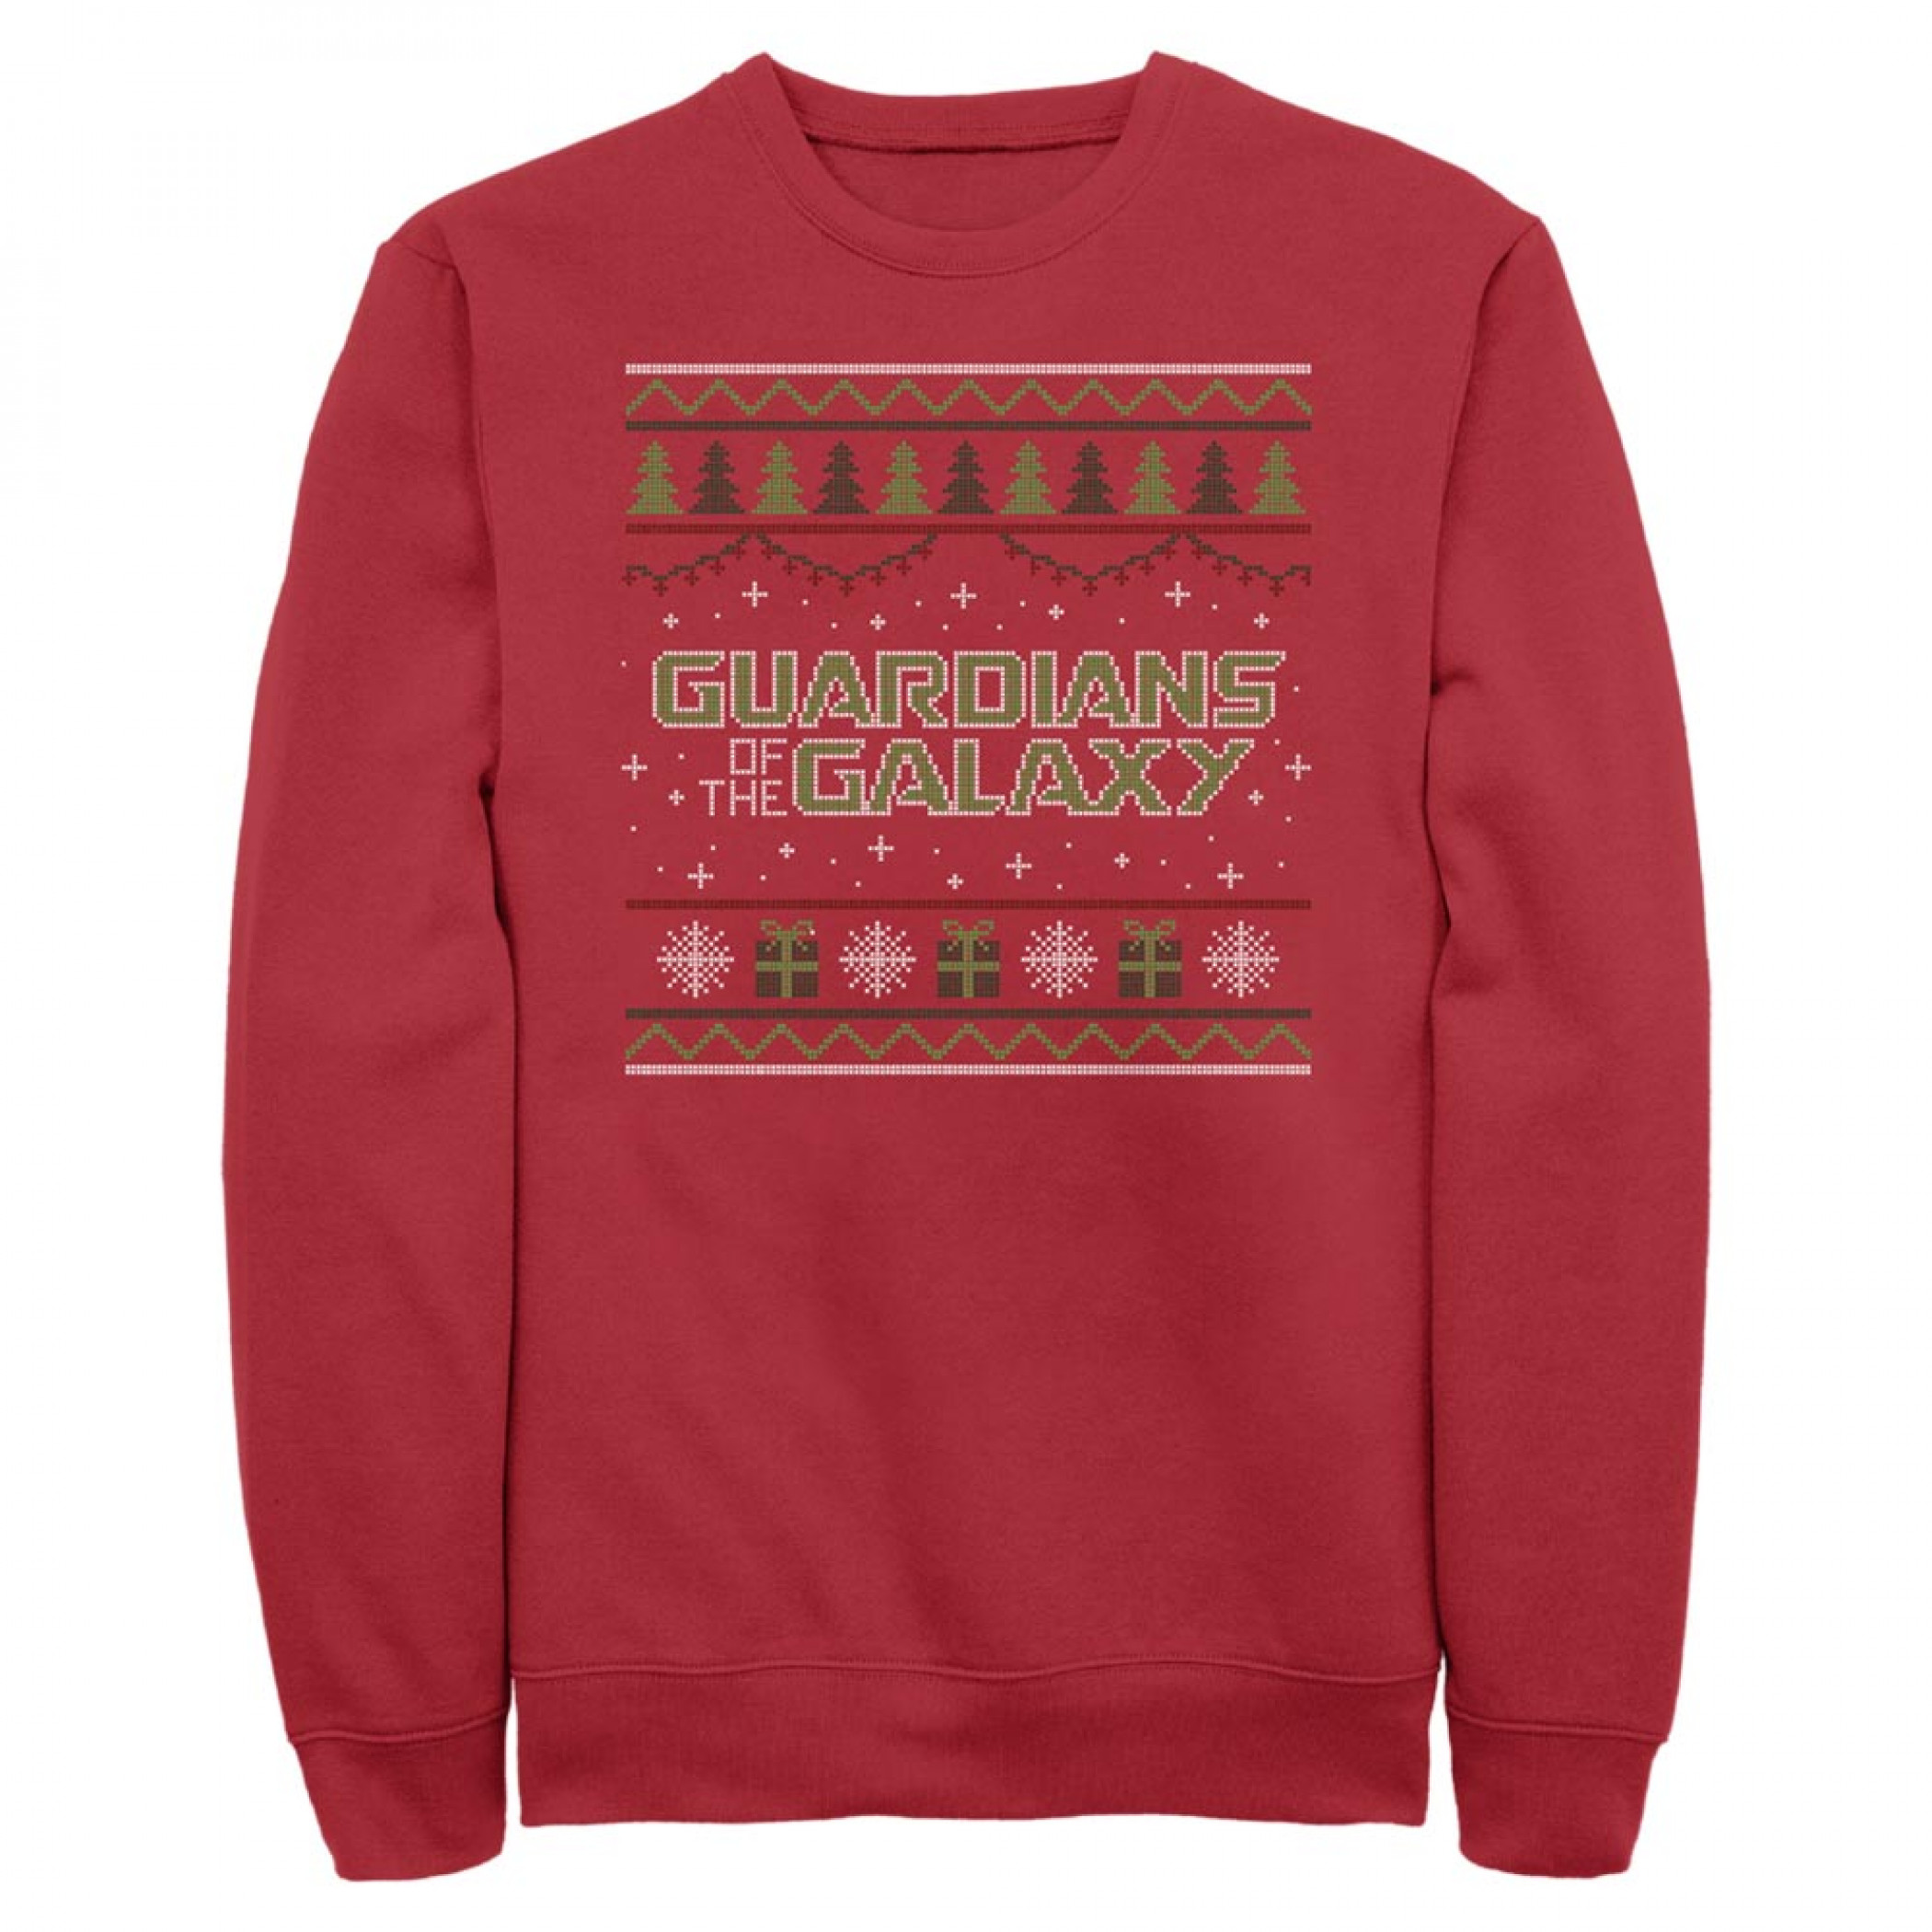 Guardians Of The Galaxy Ugly Sweater Styled Sweatshirt